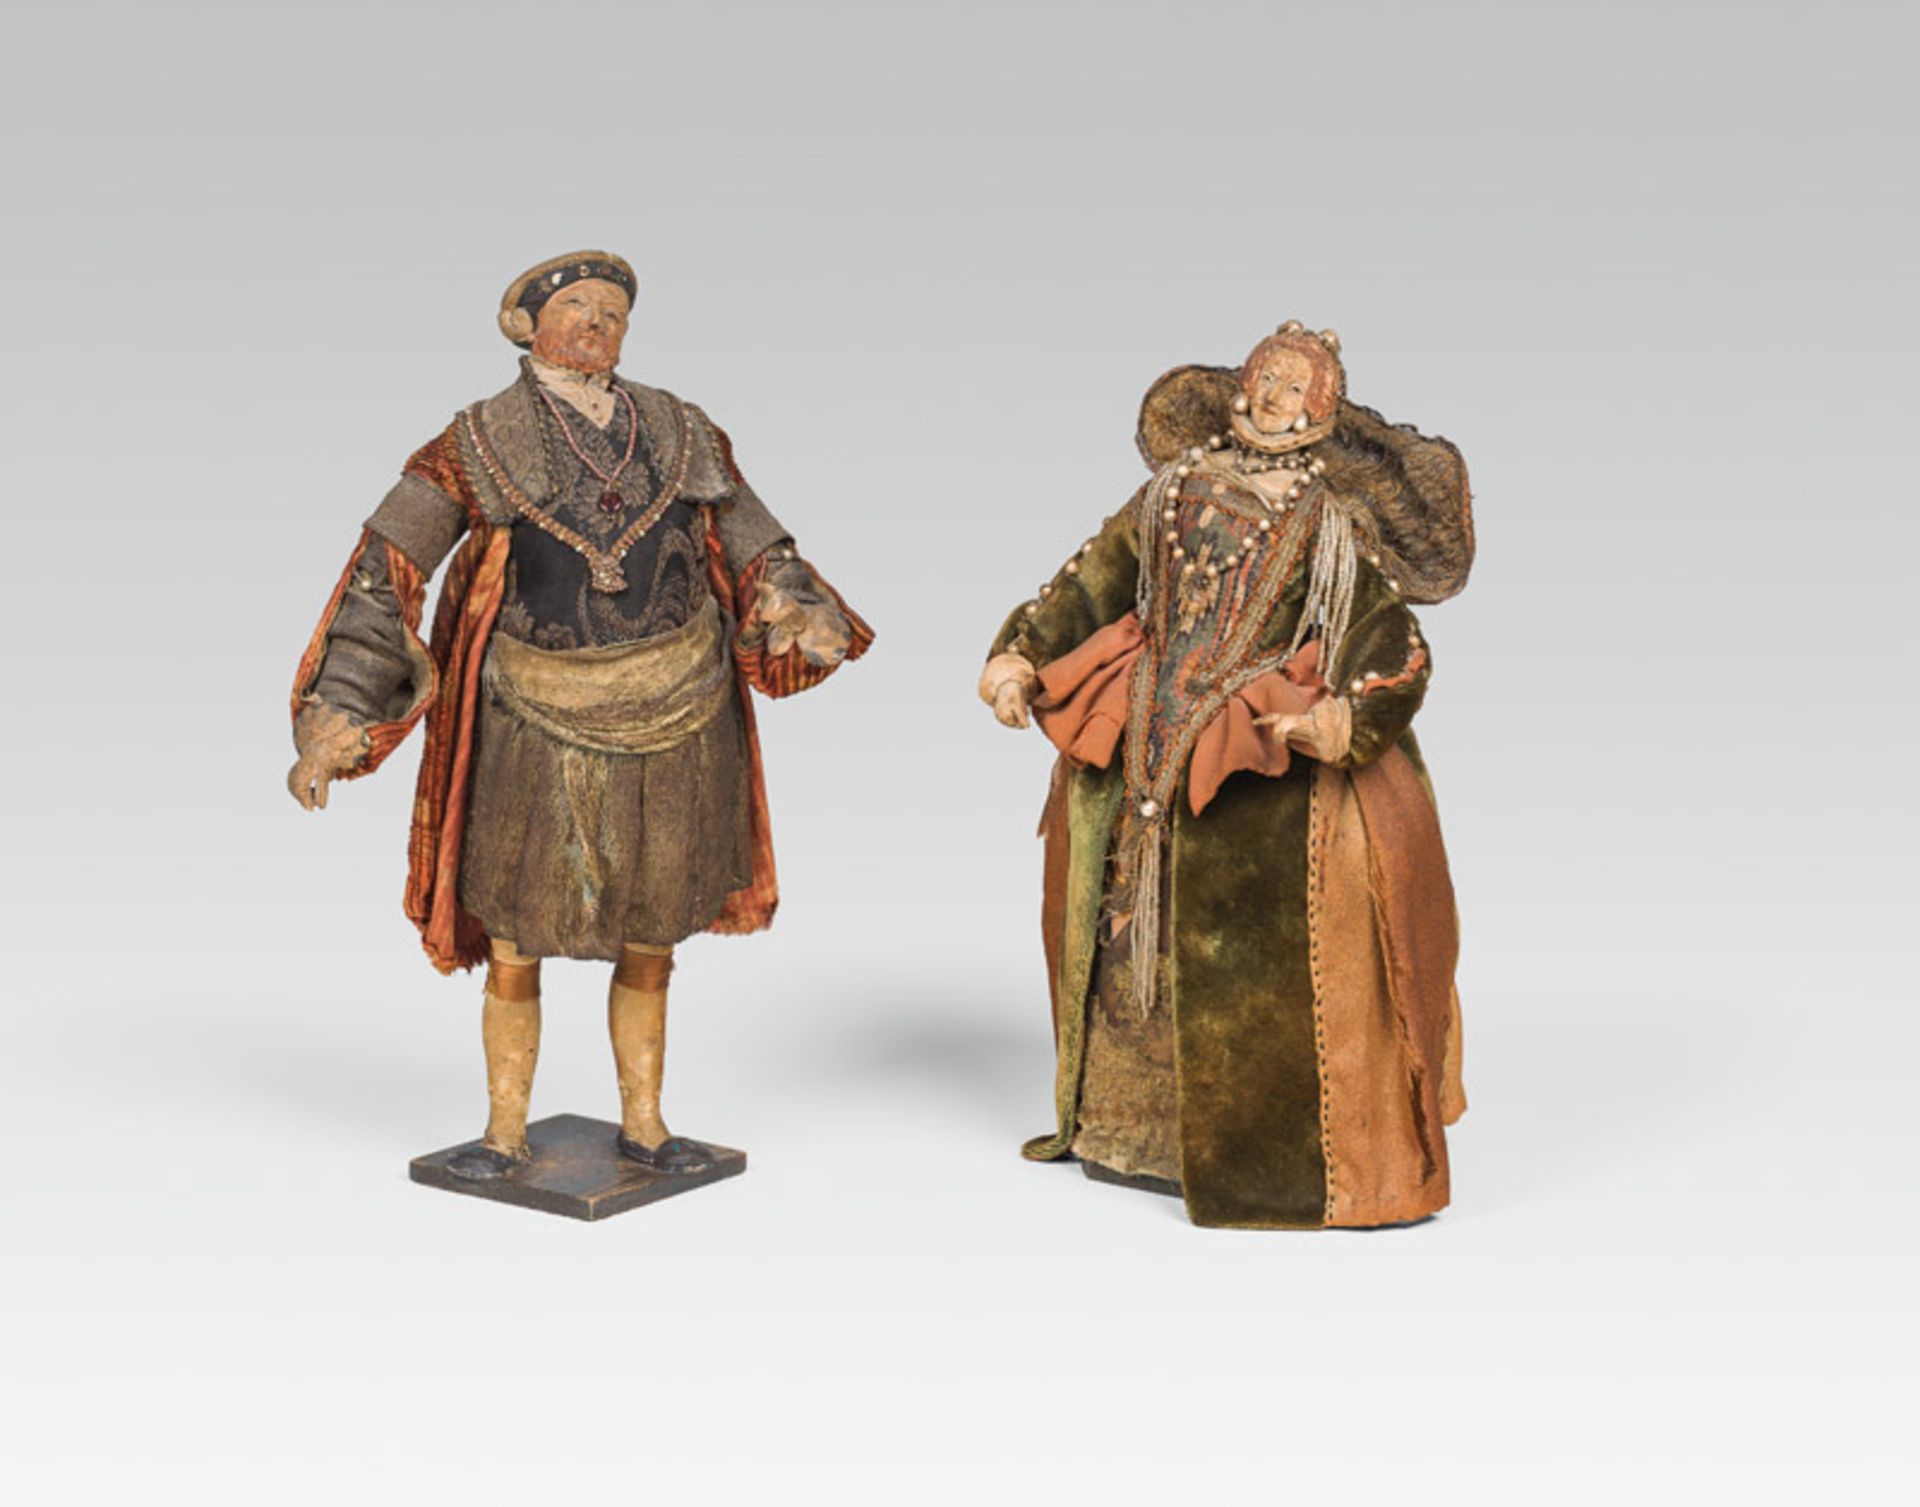 Puppets "Henry VIII" and "Elizabeth I", 17th/18th century